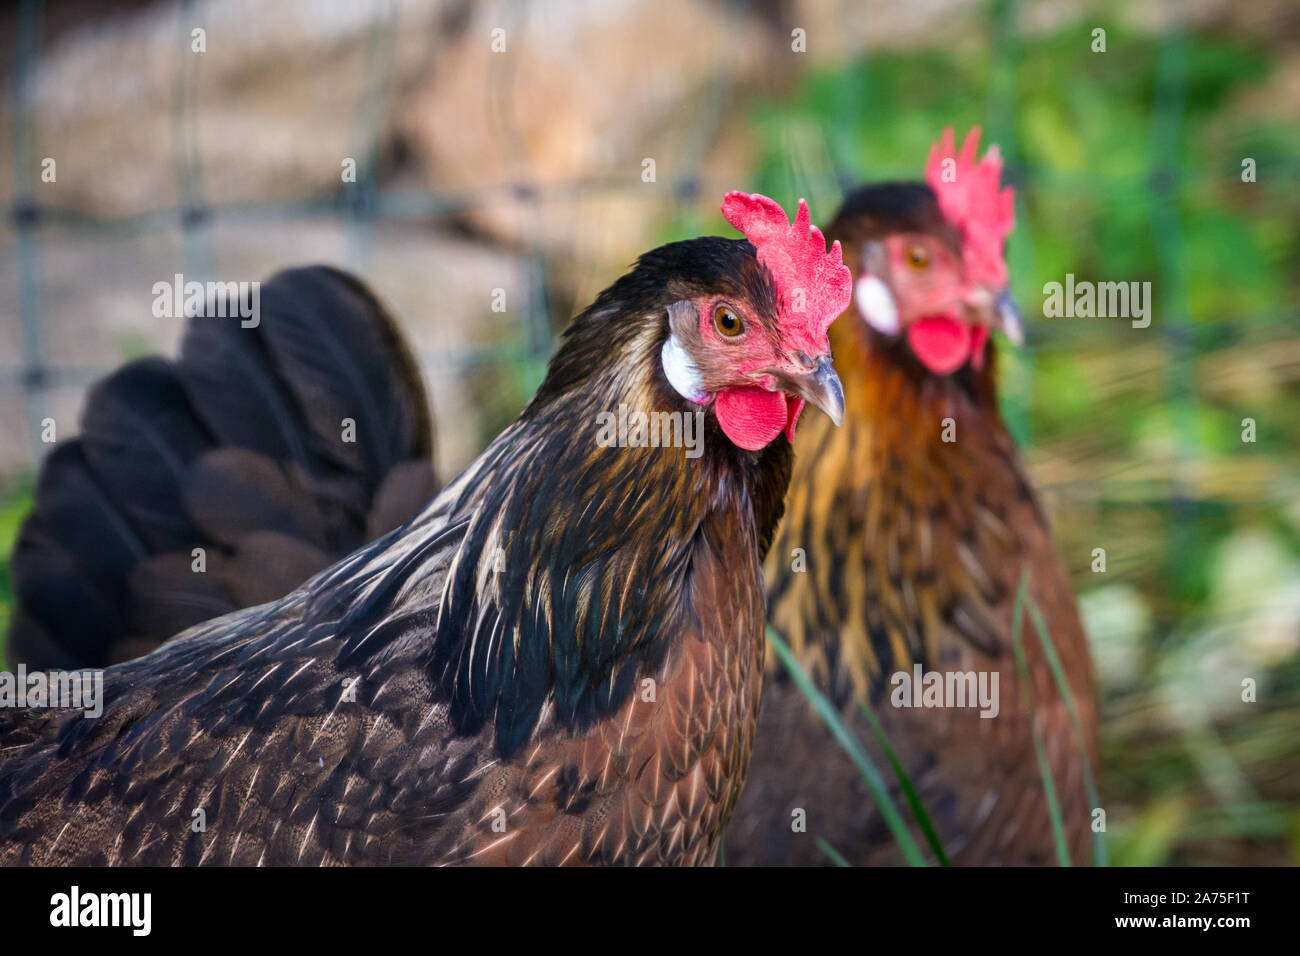 Proveis-Ultentaler chicken hens, a critically endangered chicken breed from South Tyrol Stock Photo